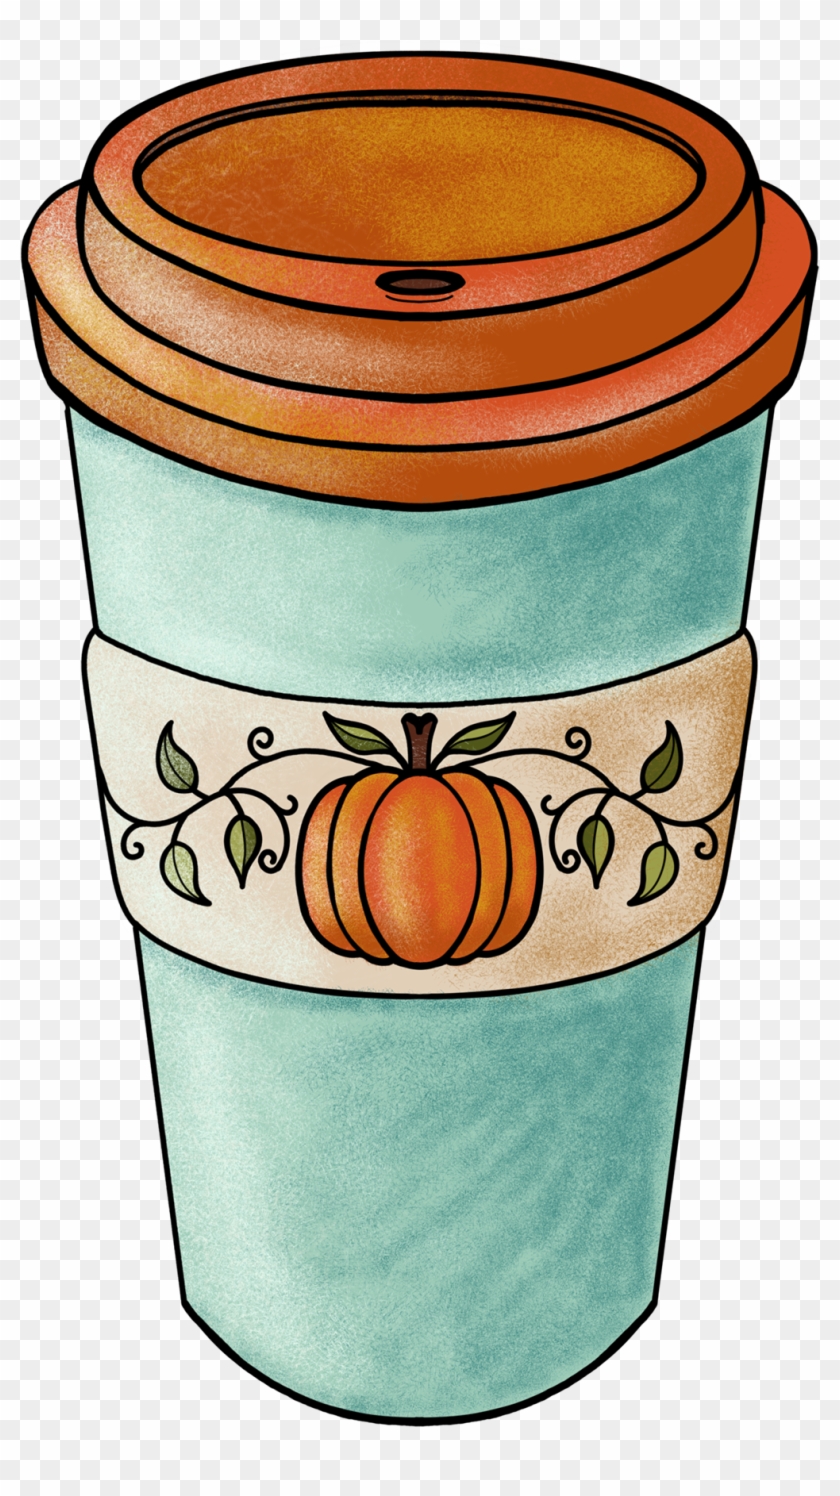 You Are Free To Download The Transparent Png Of This - Cup #611176